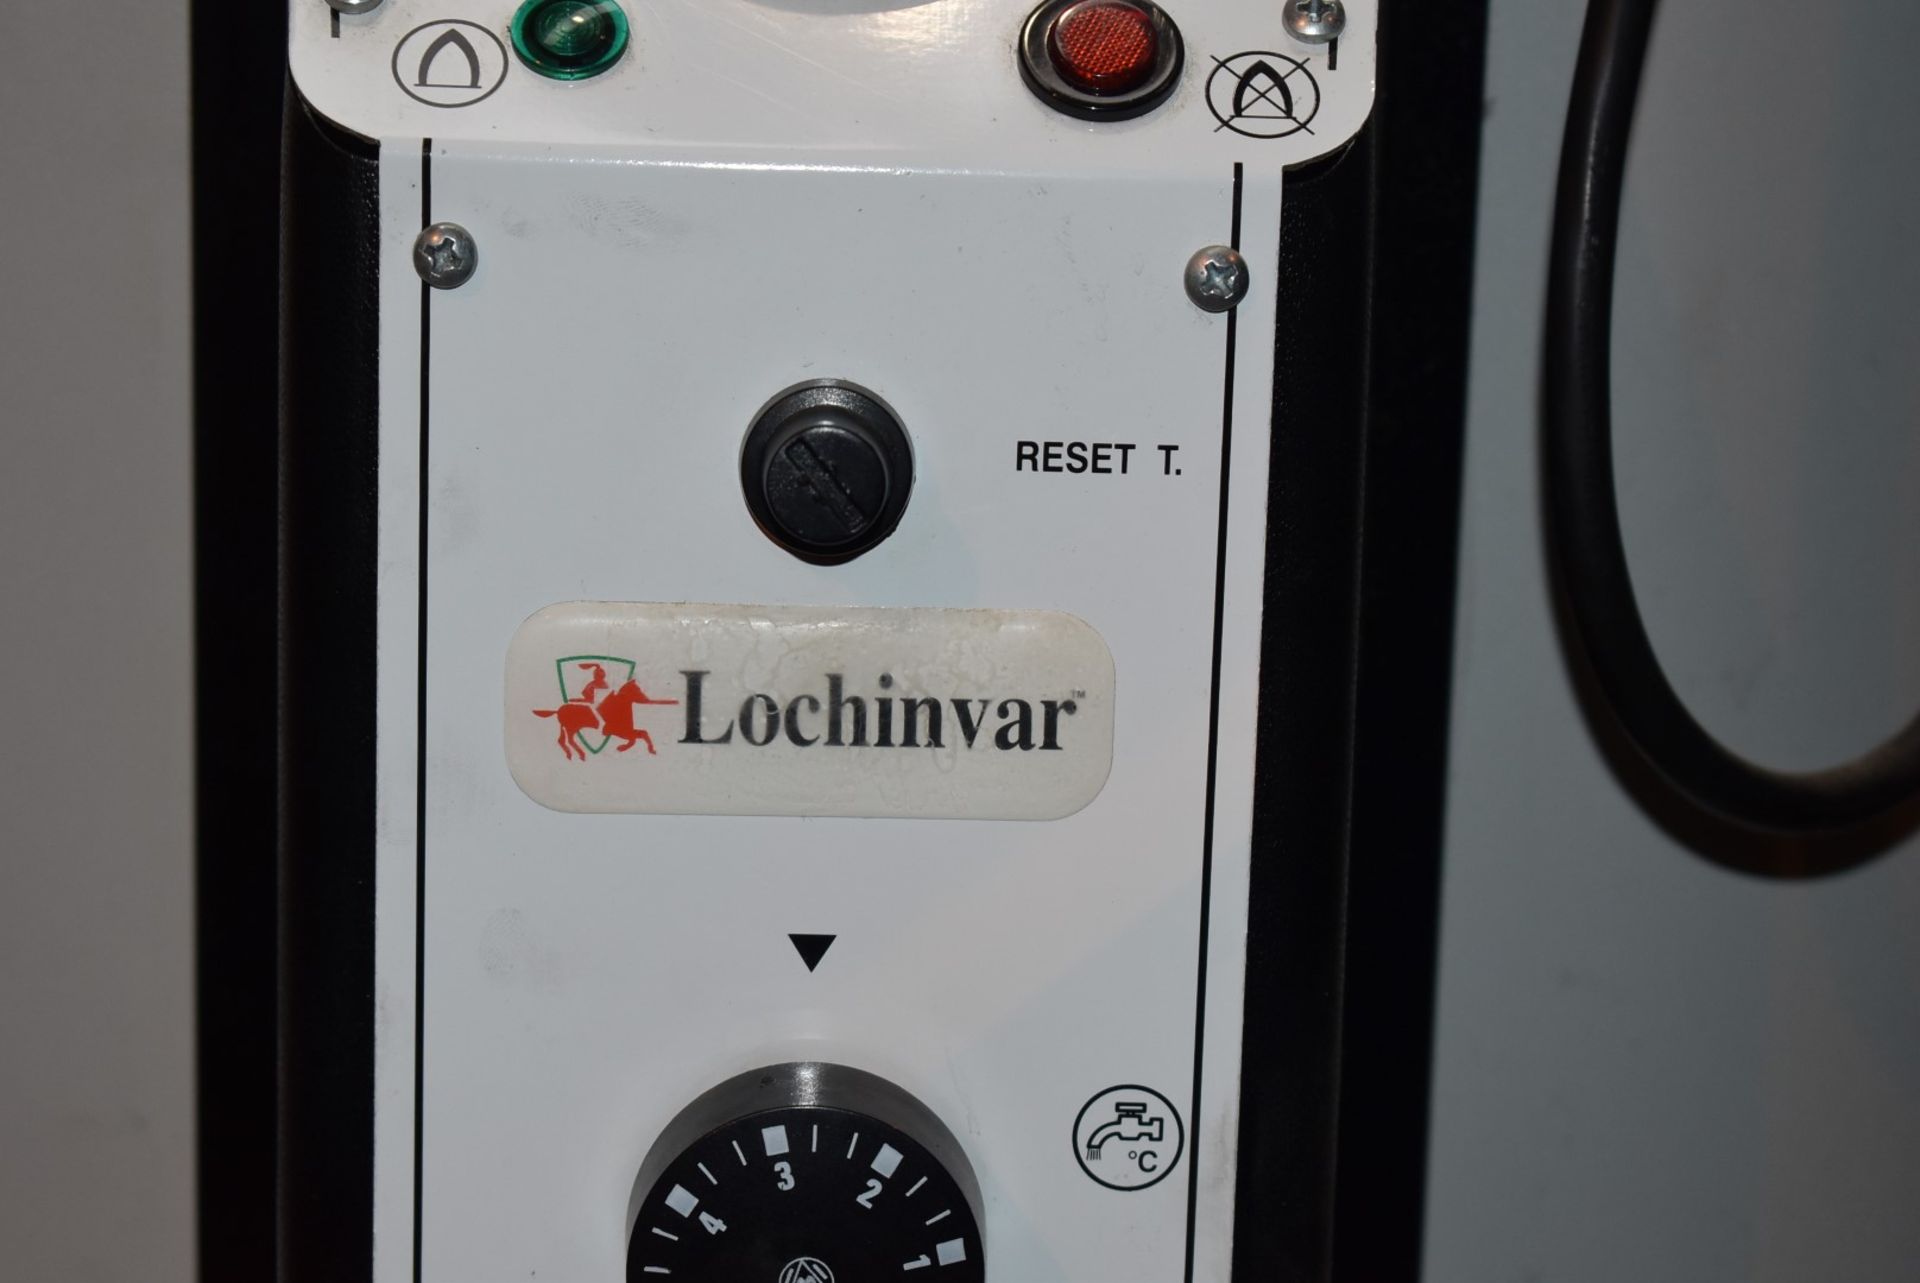 1 x Lochinvar High Efficiency Gas Fired 220L Storage Water Heater - Model LBF-220 - Ref: WH2-144 H5D - Image 8 of 19